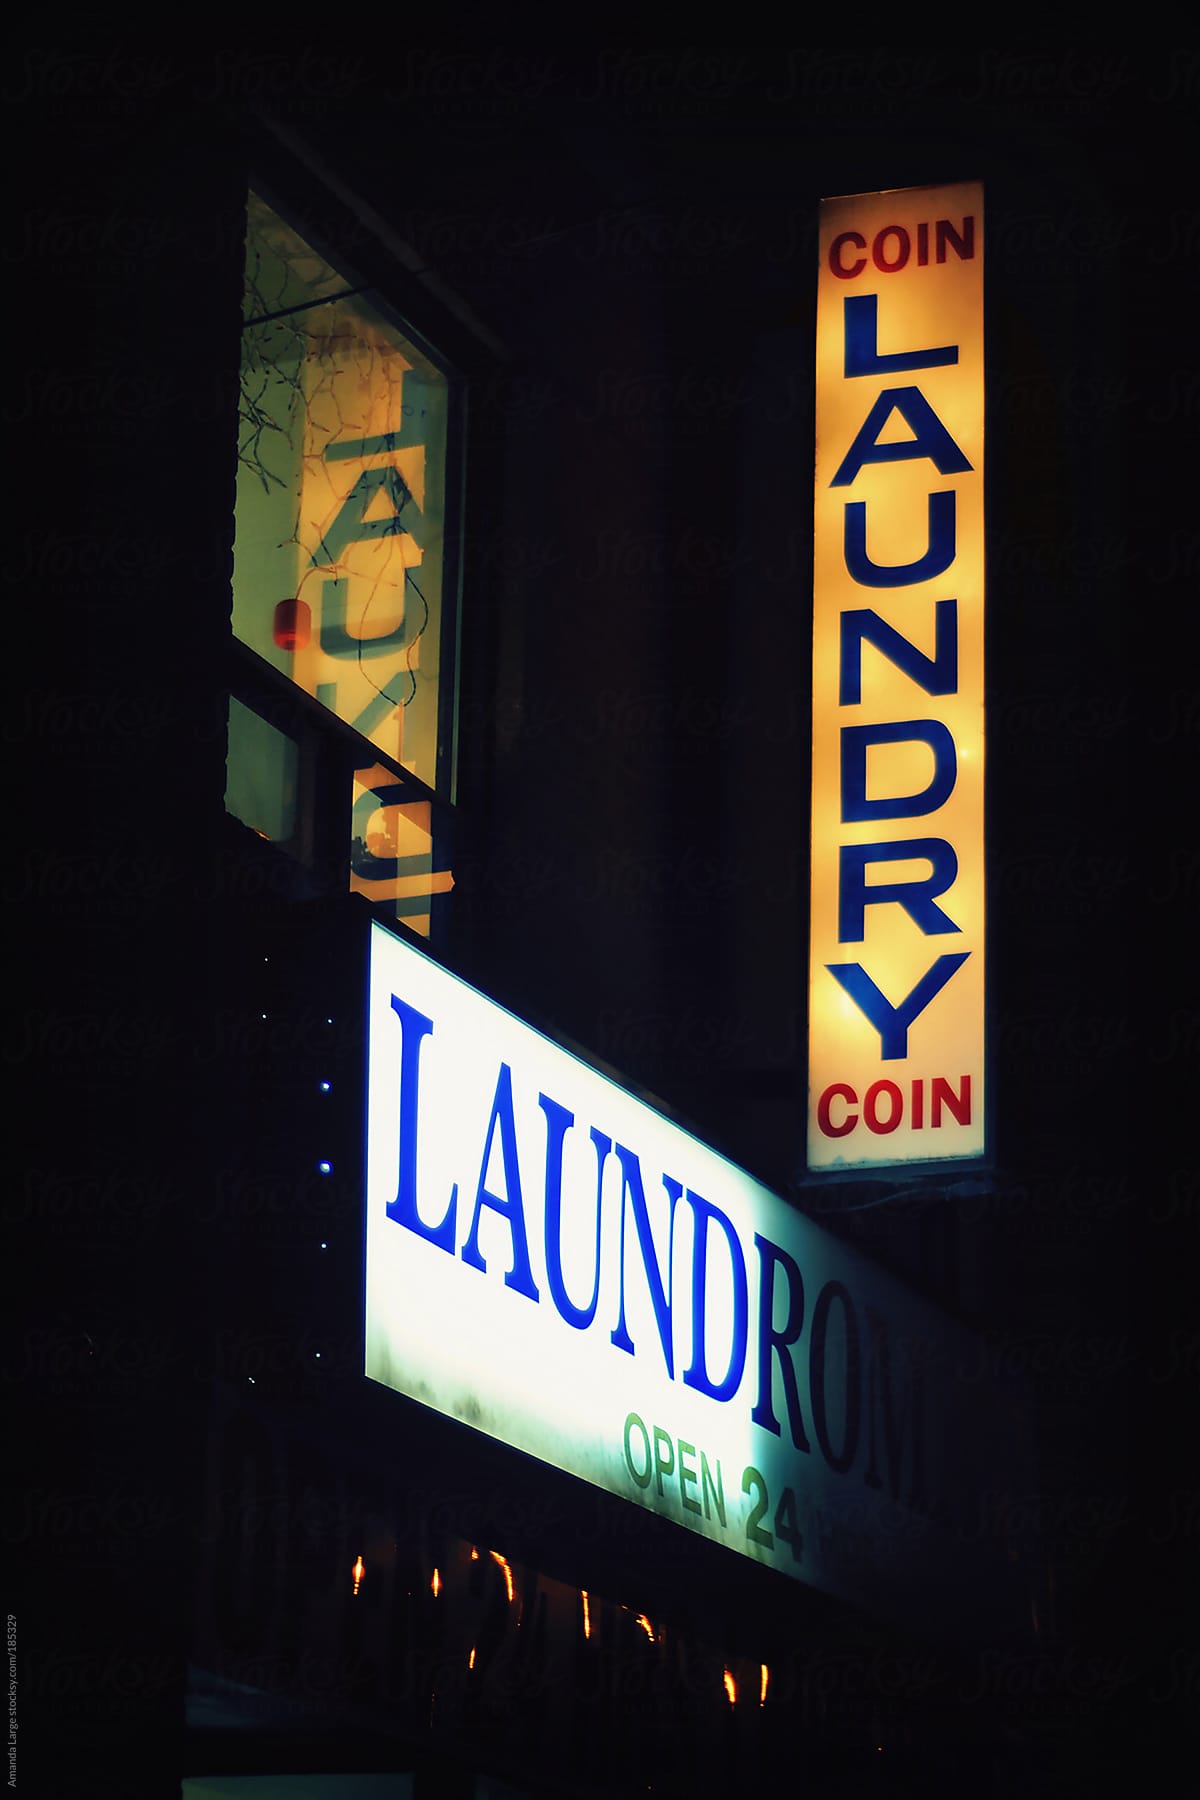 coin laundry sign lit up at night